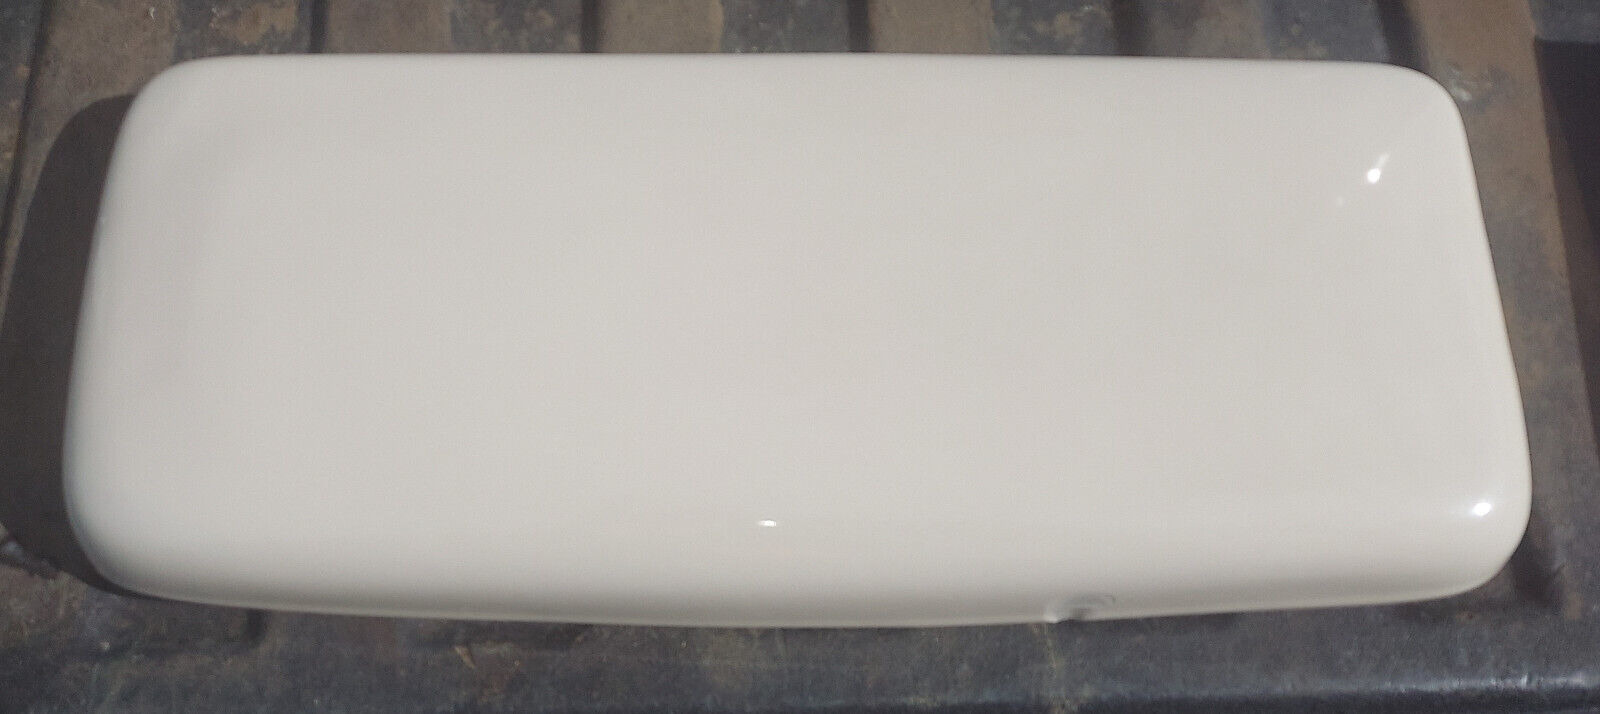 Primary image for 23FF46 TOILET TANK LID, AMERICAN STANDARD 1419RJ, BONE???, CHIP ON FRONT, FAIR